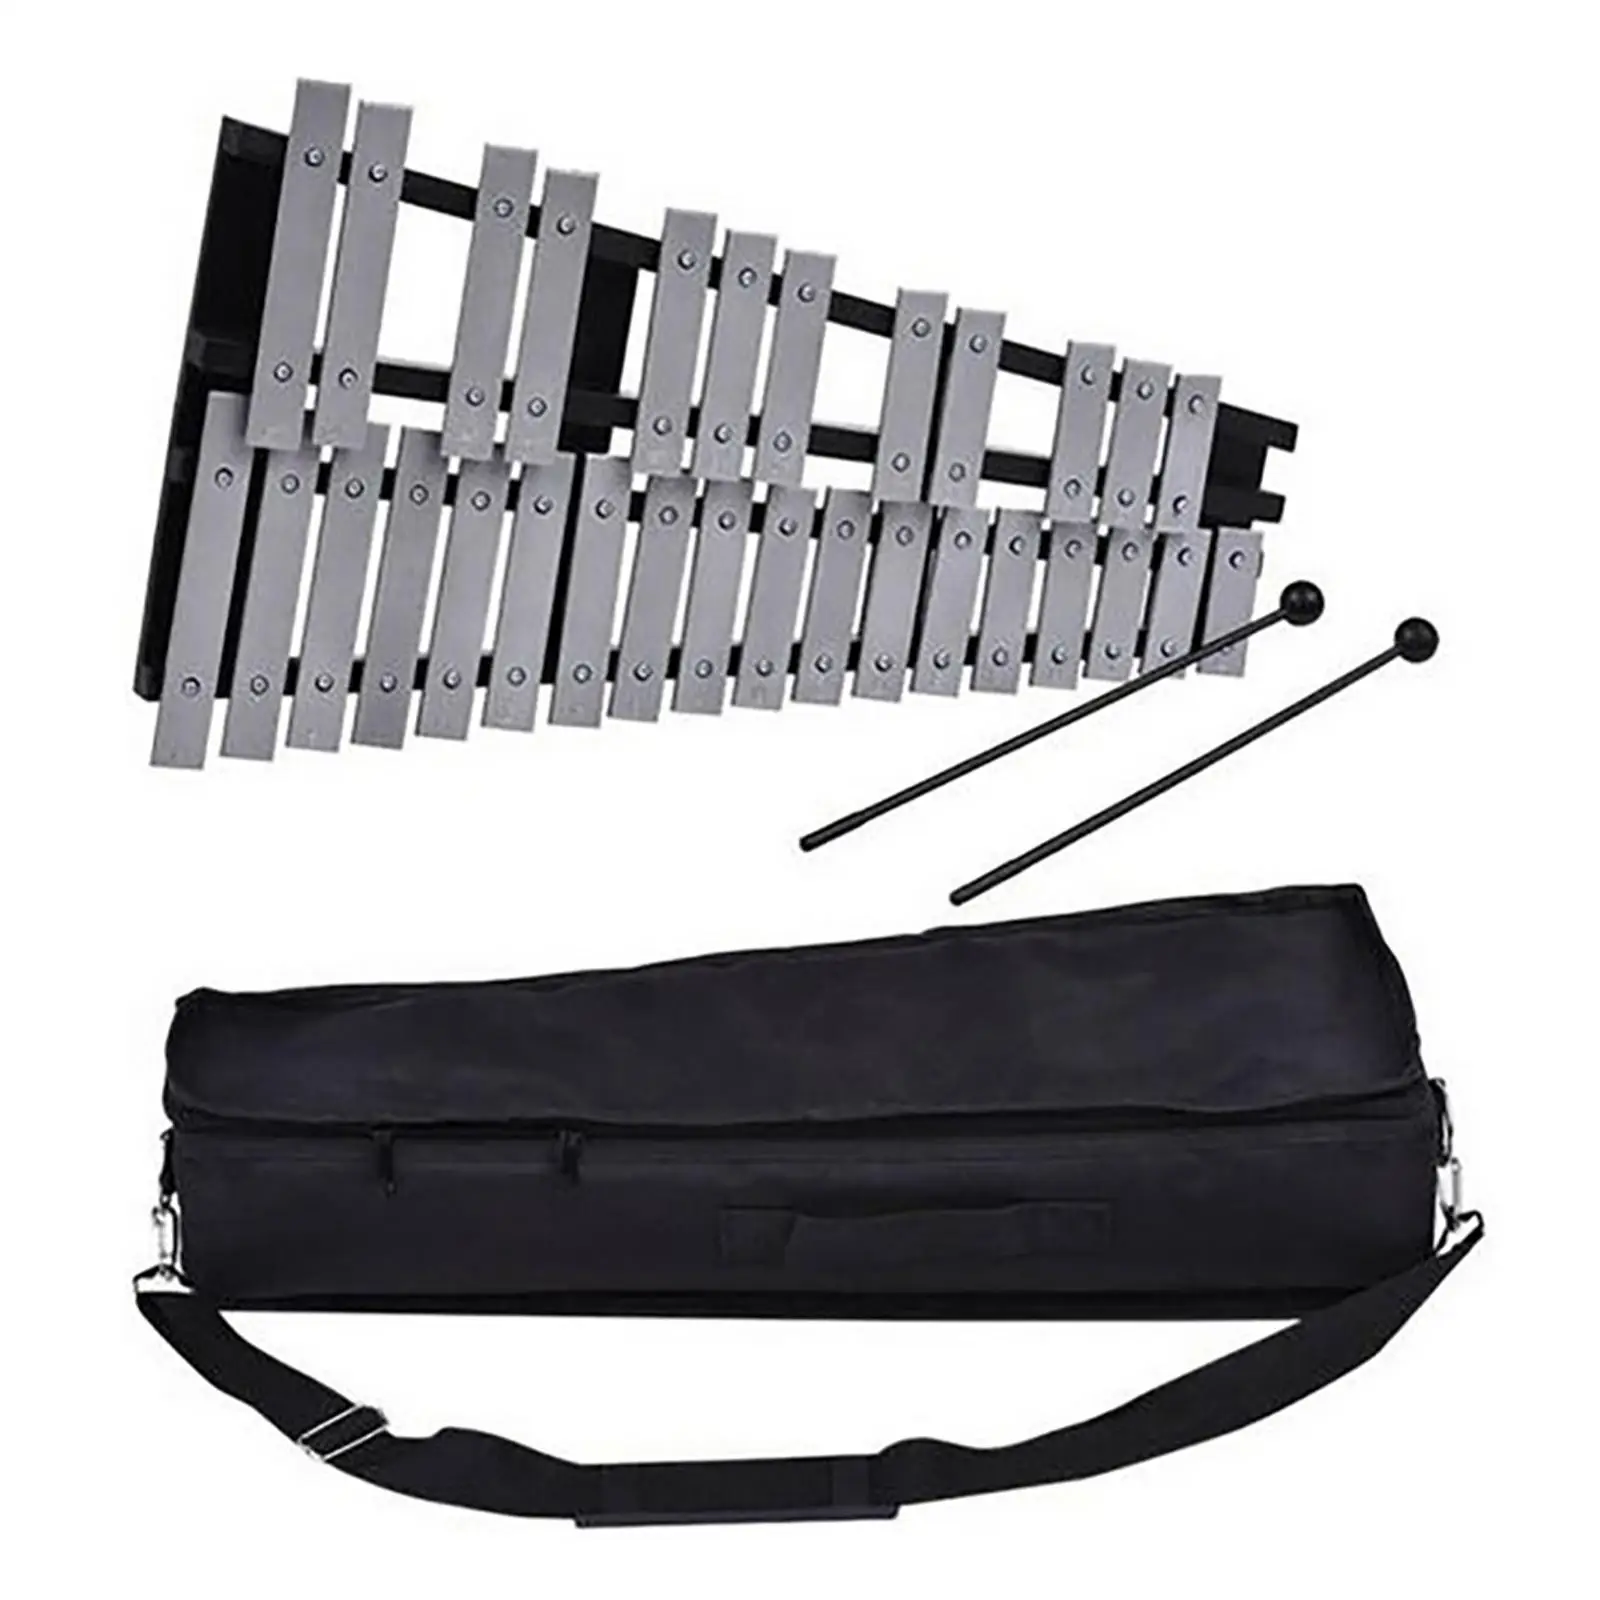 Professional 32 Notes Glockenspiel Xylophone Bell Percussion Instrument Kit and Carrying Bag for Beginner Kids Adult Gifts